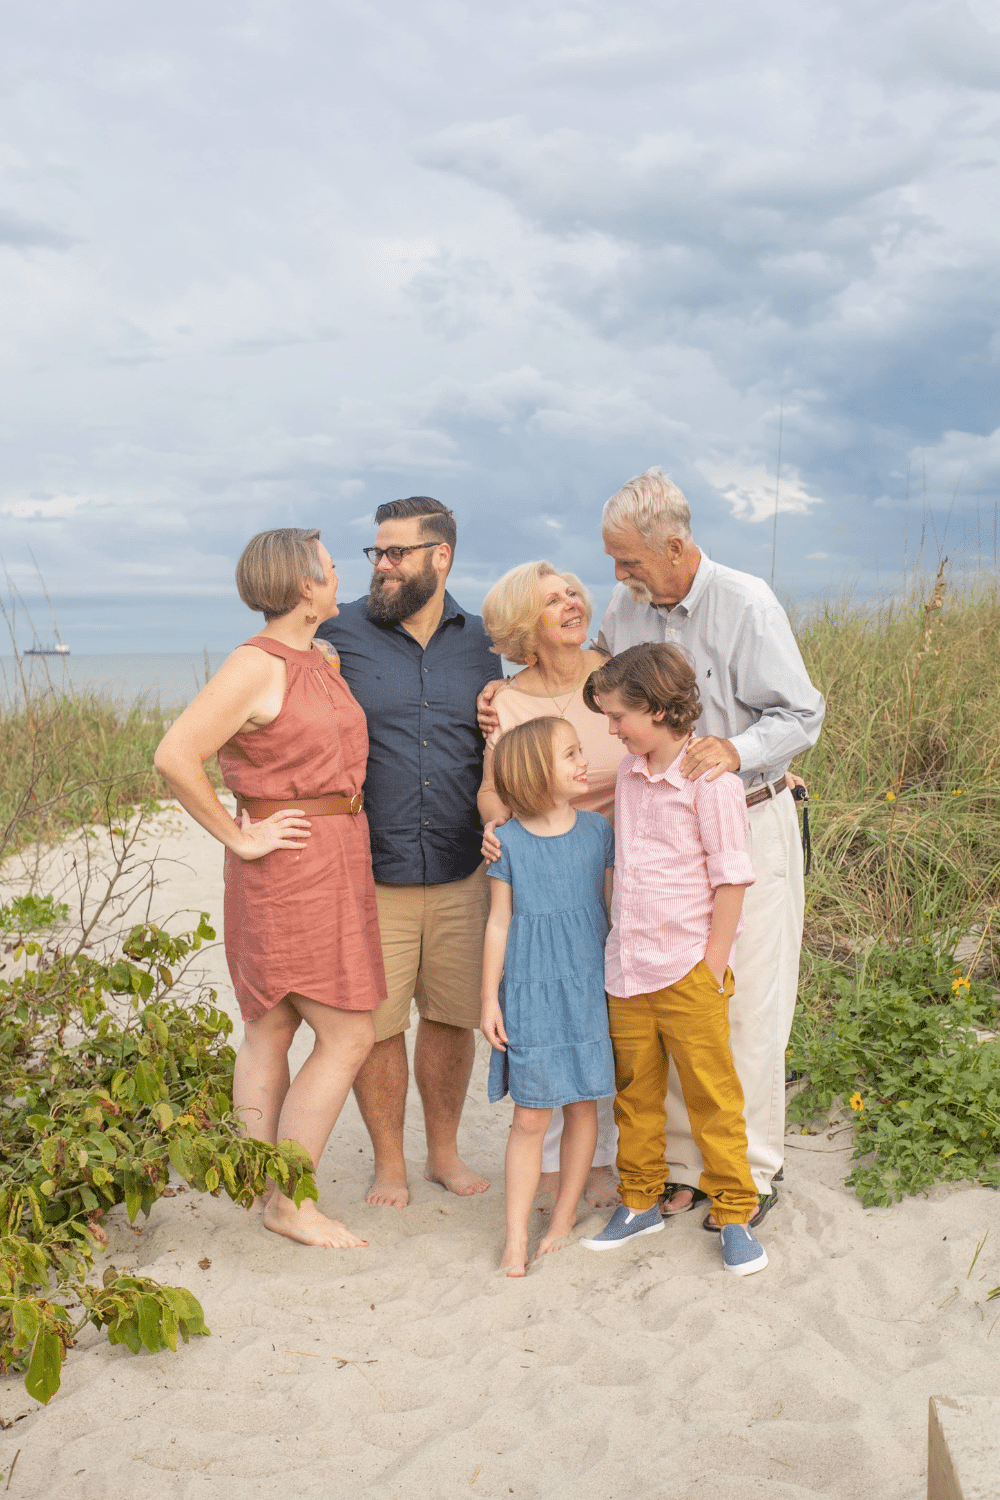 cocoa beach family photoshoot with a family of 4 and their grandparents. They re wearing Blue and pink outfits for beach photos.